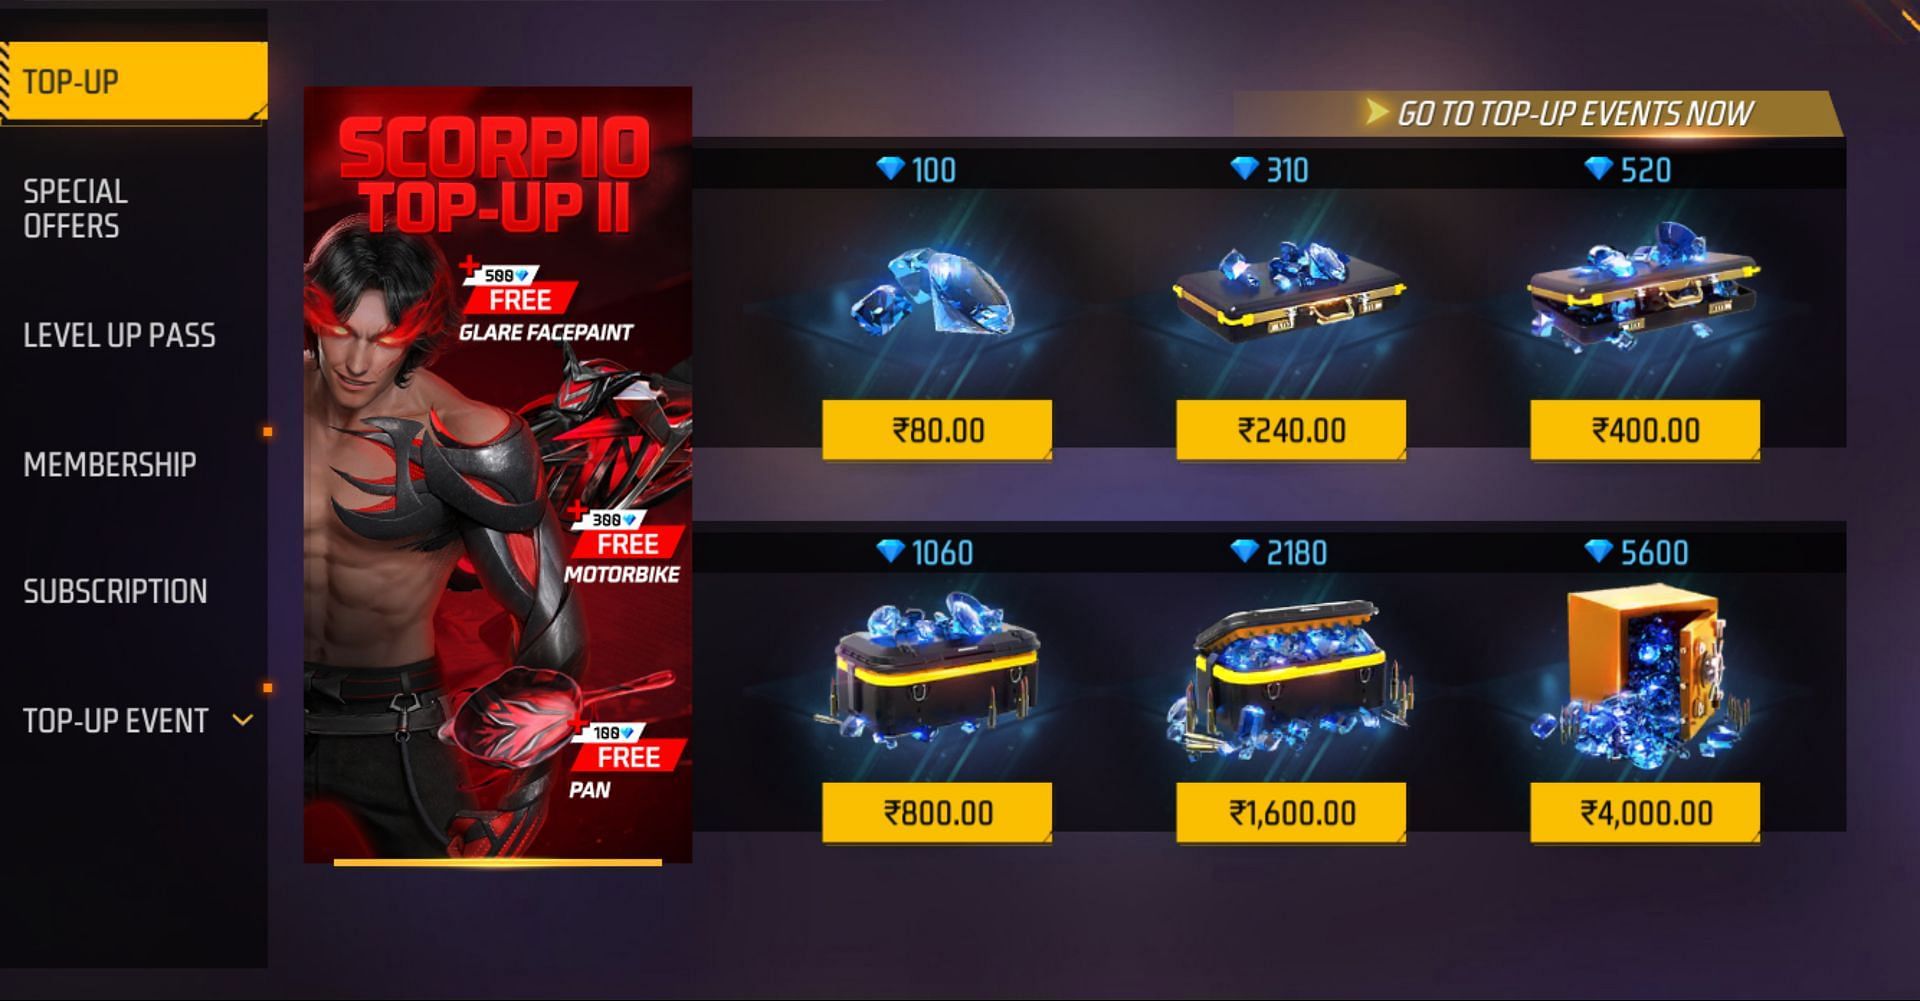 You can complete the process using in-game currency (Image via Garena)